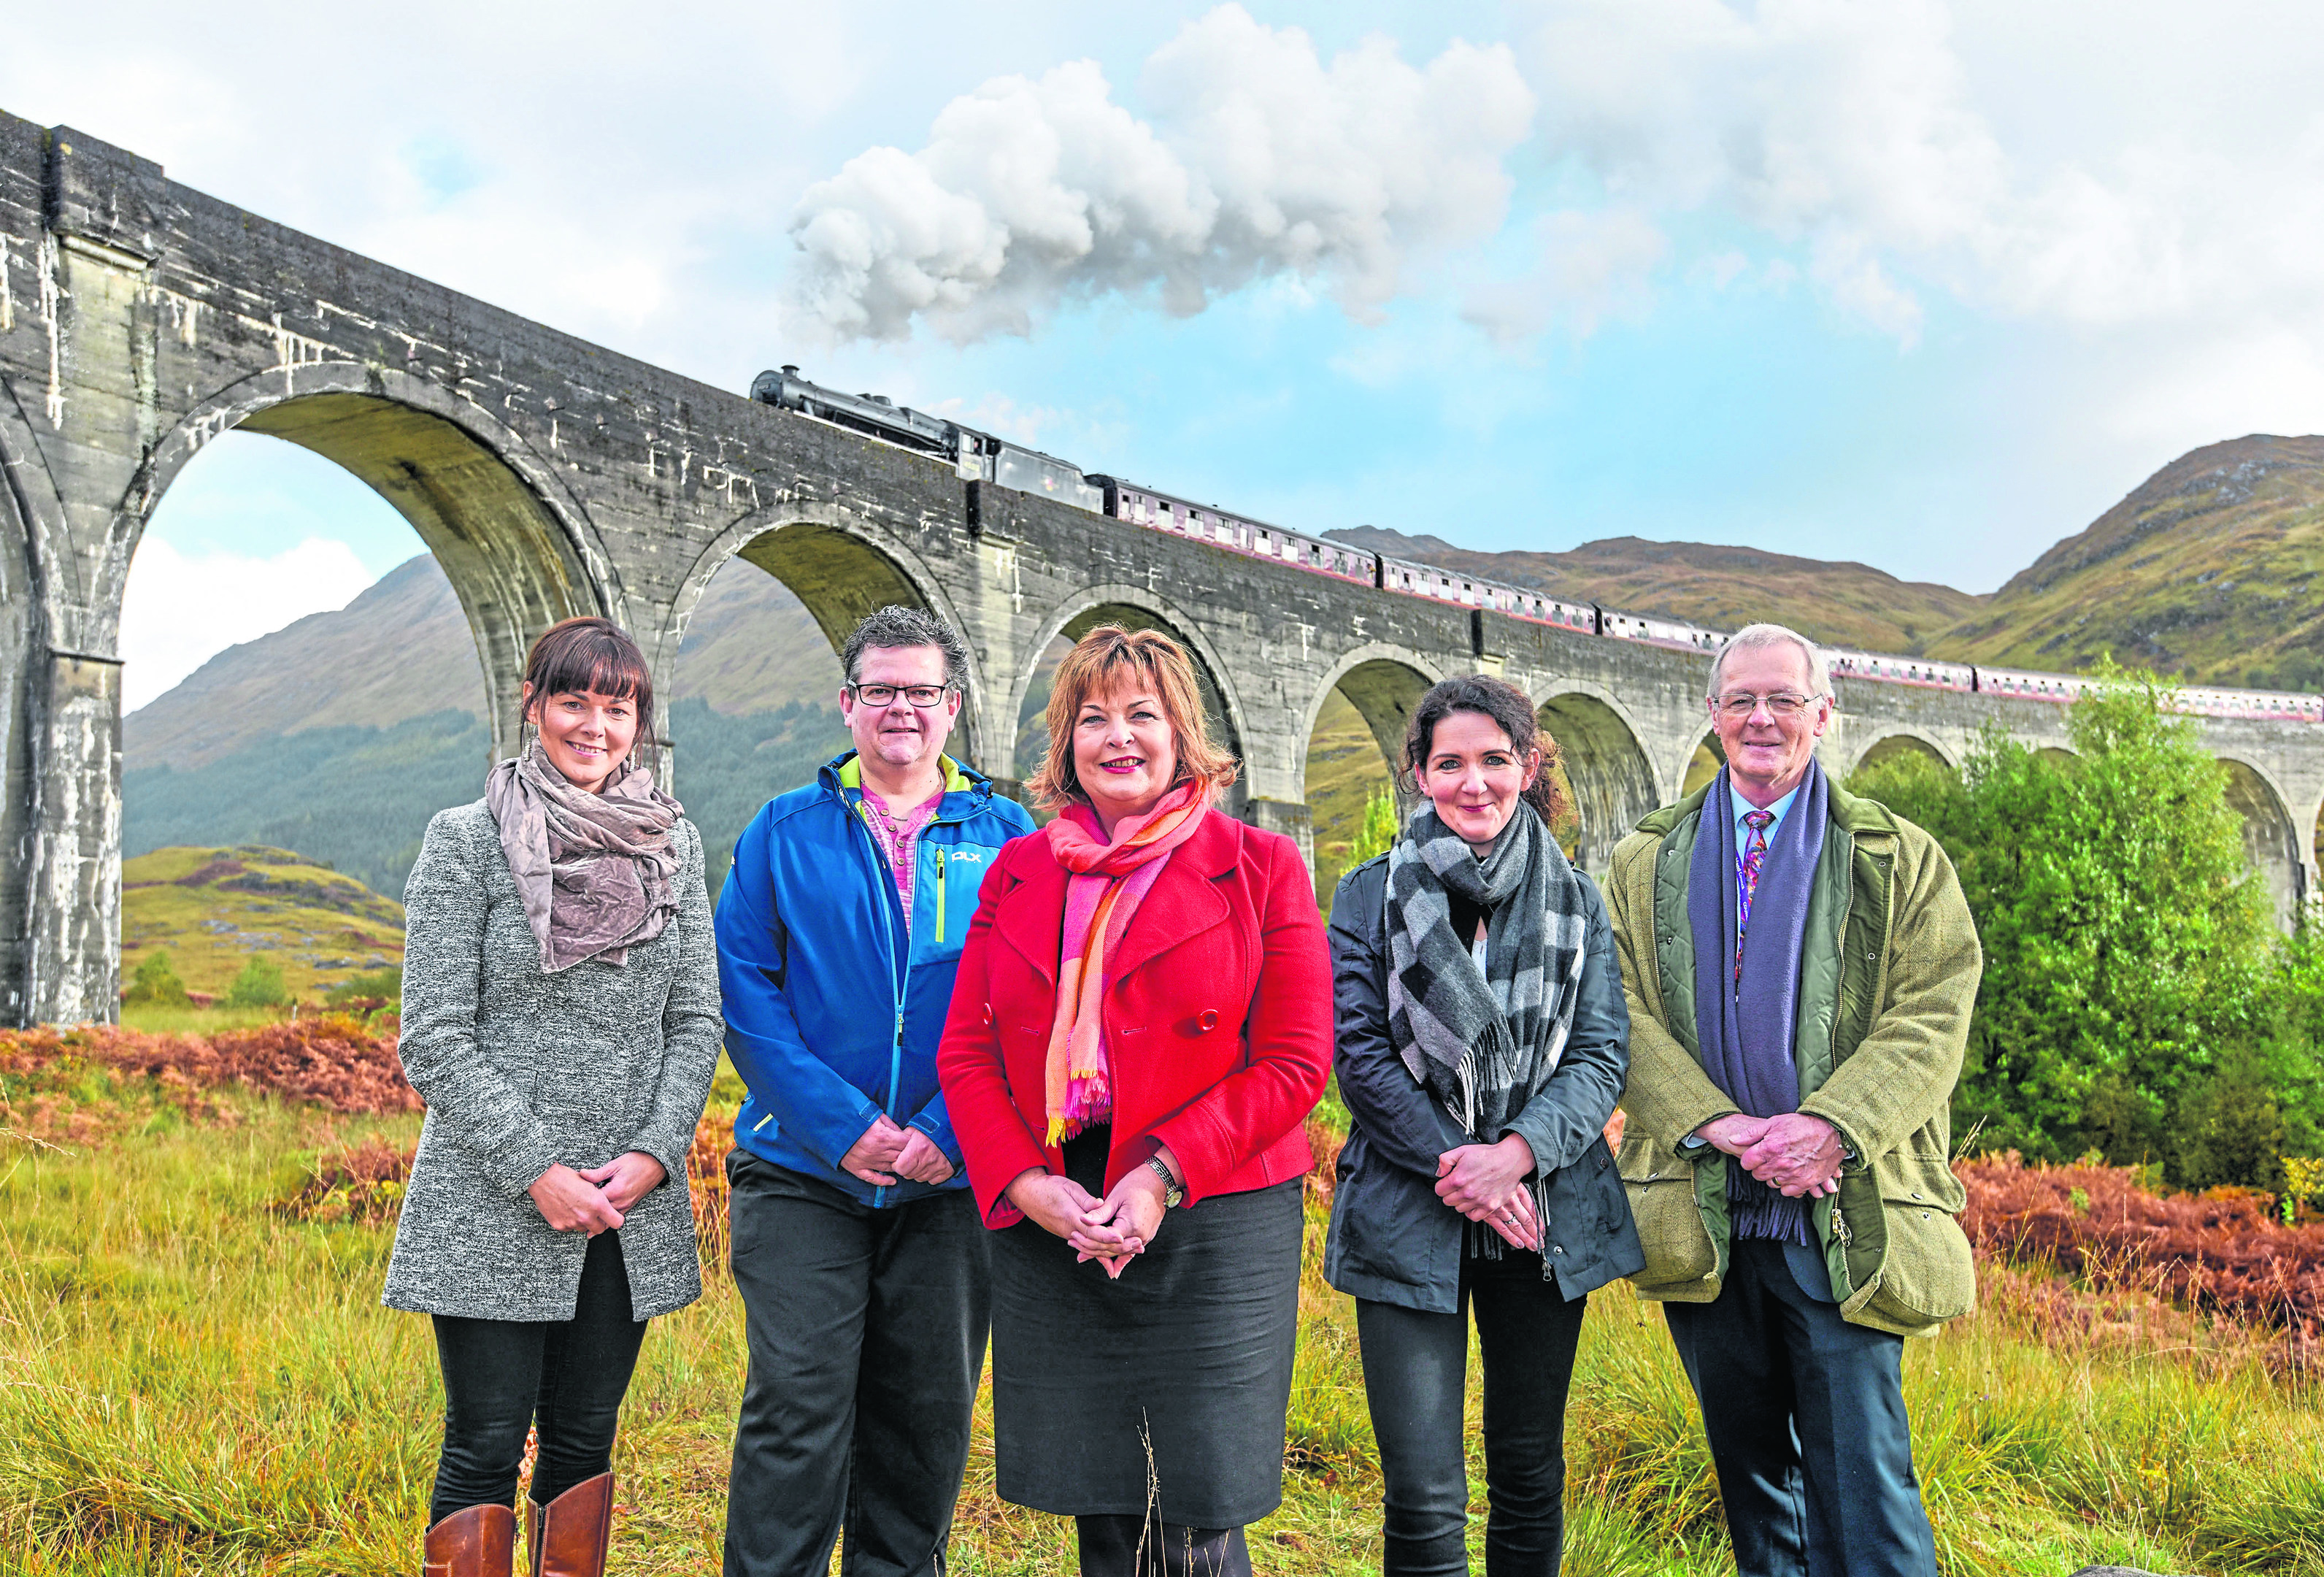 Cabinet Secretary Fiona Hyslop at Glenfinnan Viaduct to announce a new tourist initiative including a new visitor car park in the area.